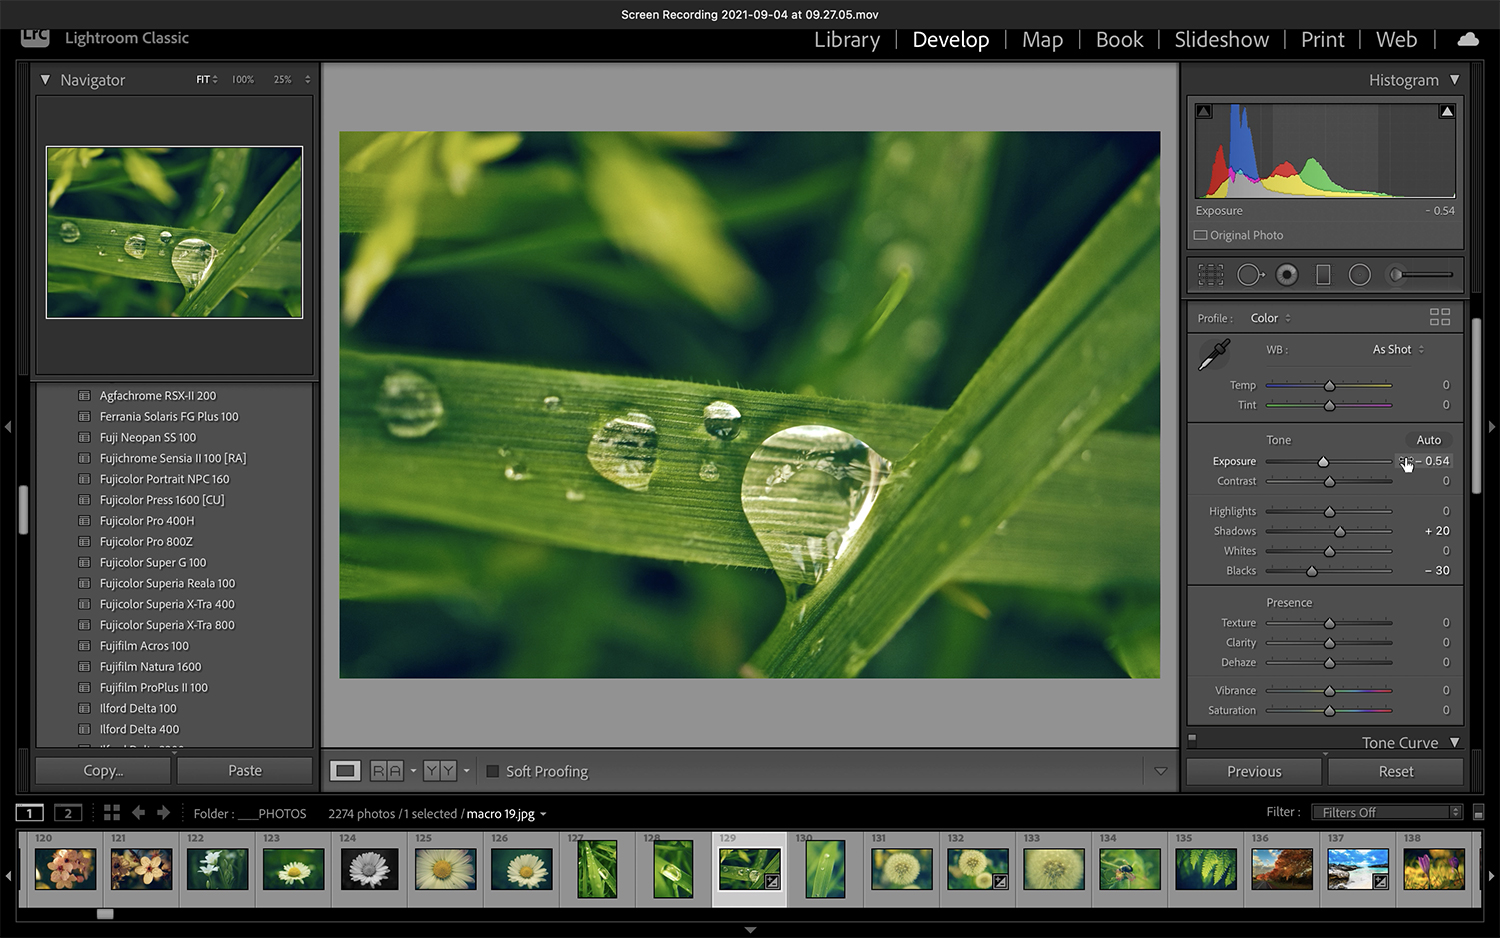 The Top 10 Lightroom Classic Tips for Your Success